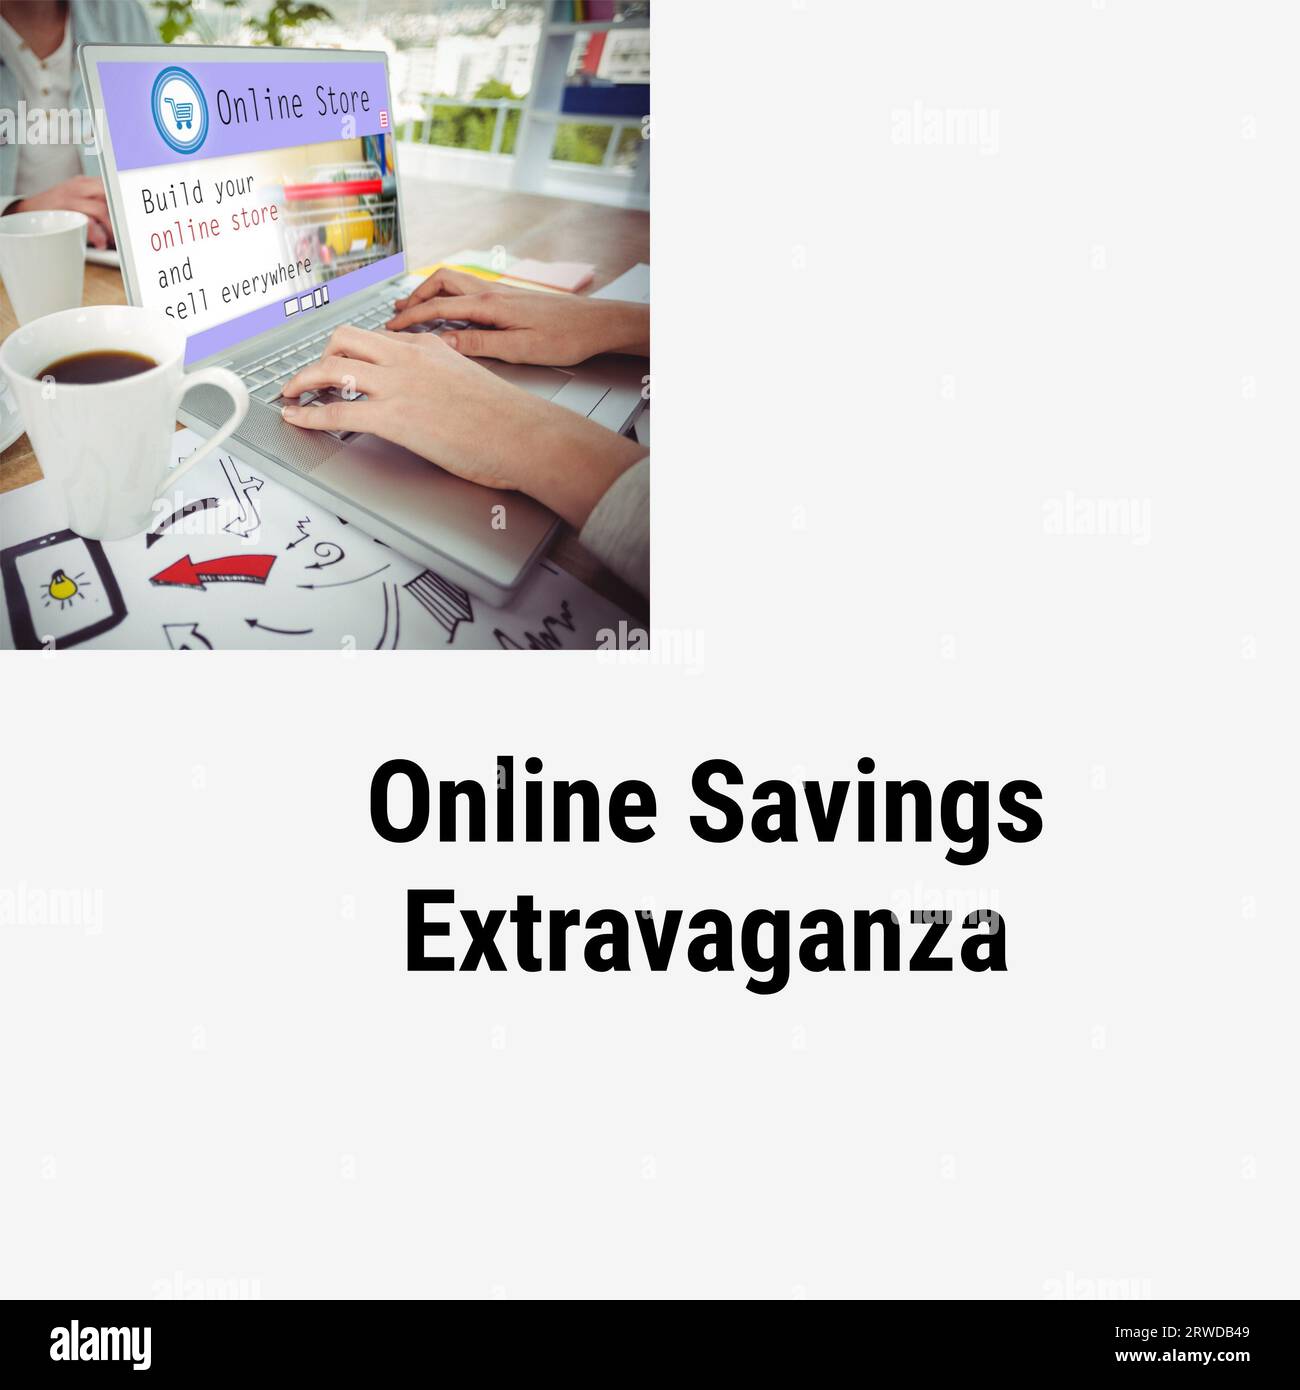 Online savings extravaganza text and hands of caucasian woman using online store on laptop in cafe Stock Photo